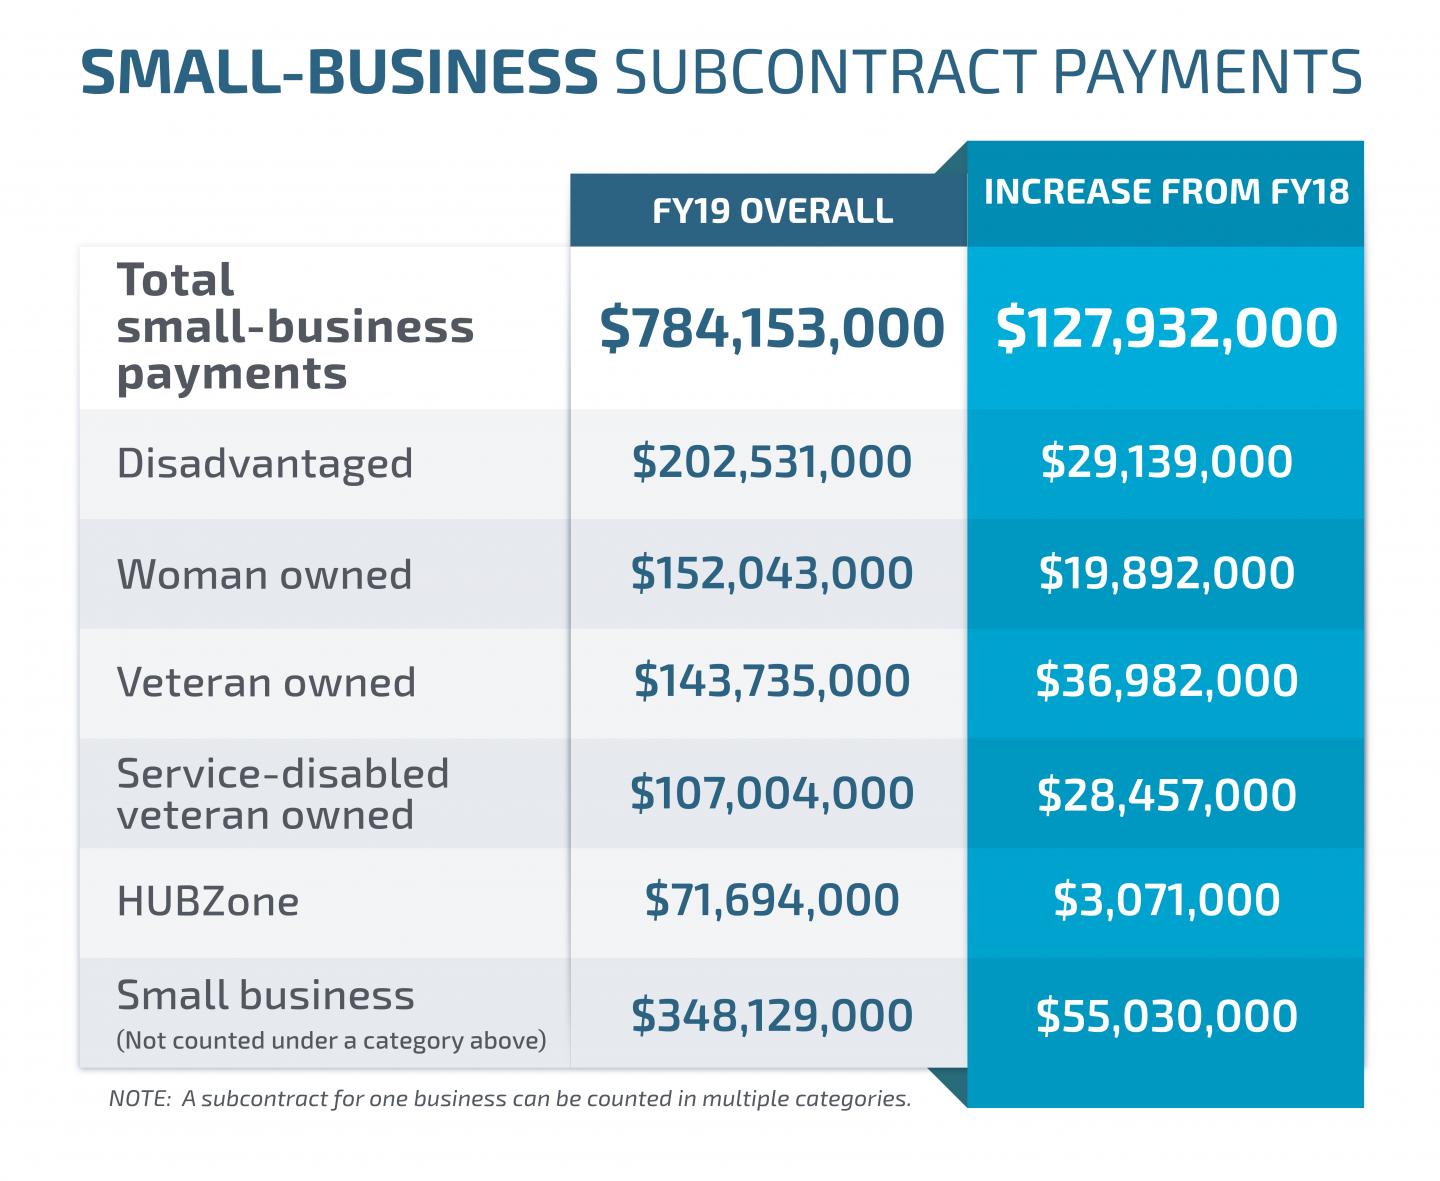 Small-Business Subcontract Payments